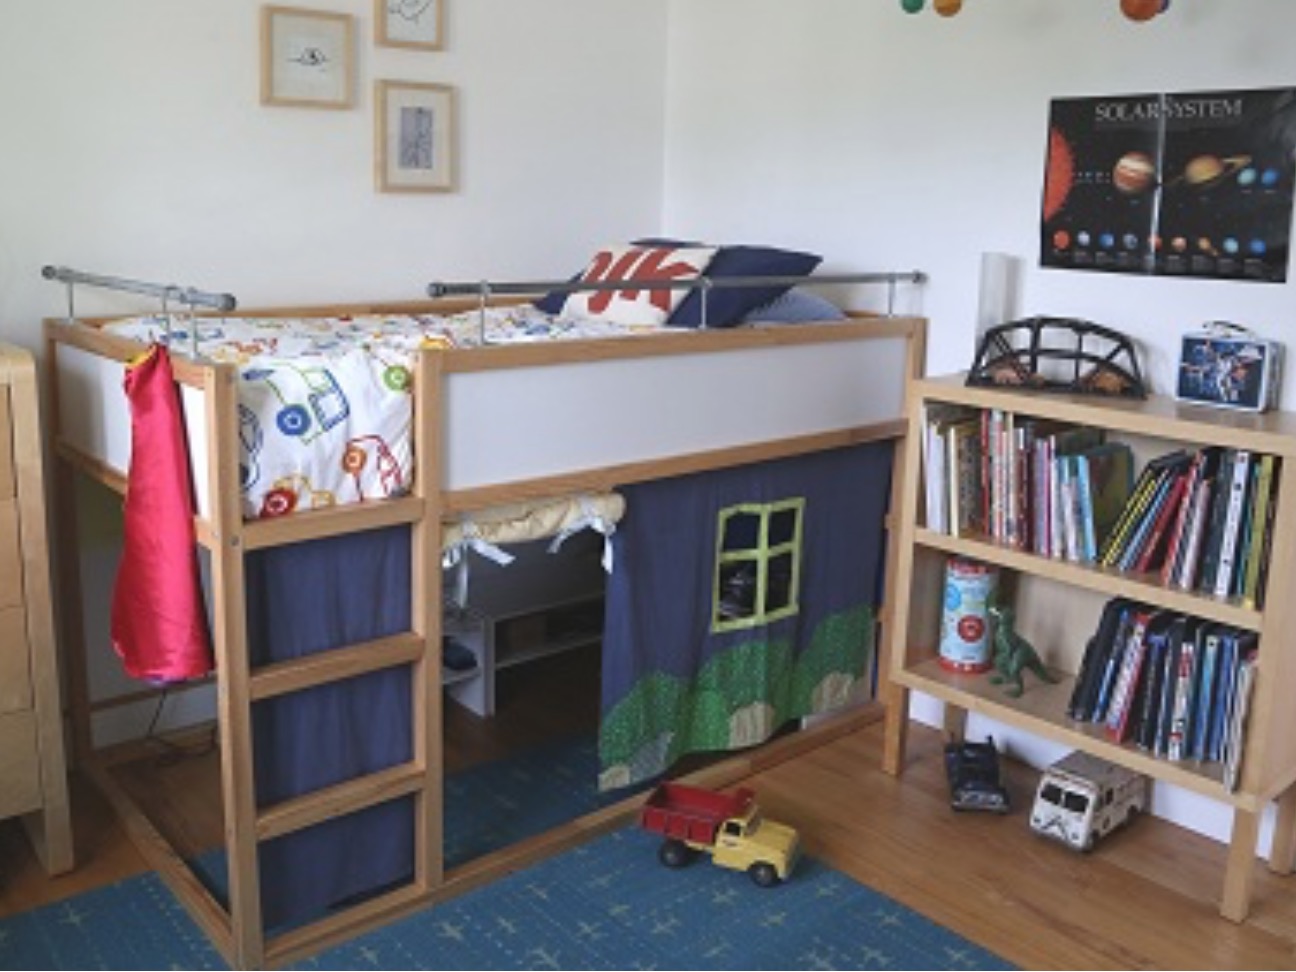 18 Awesome Ikea Bunk Bed S Your, Ikea Bunk Bed Room Ideas